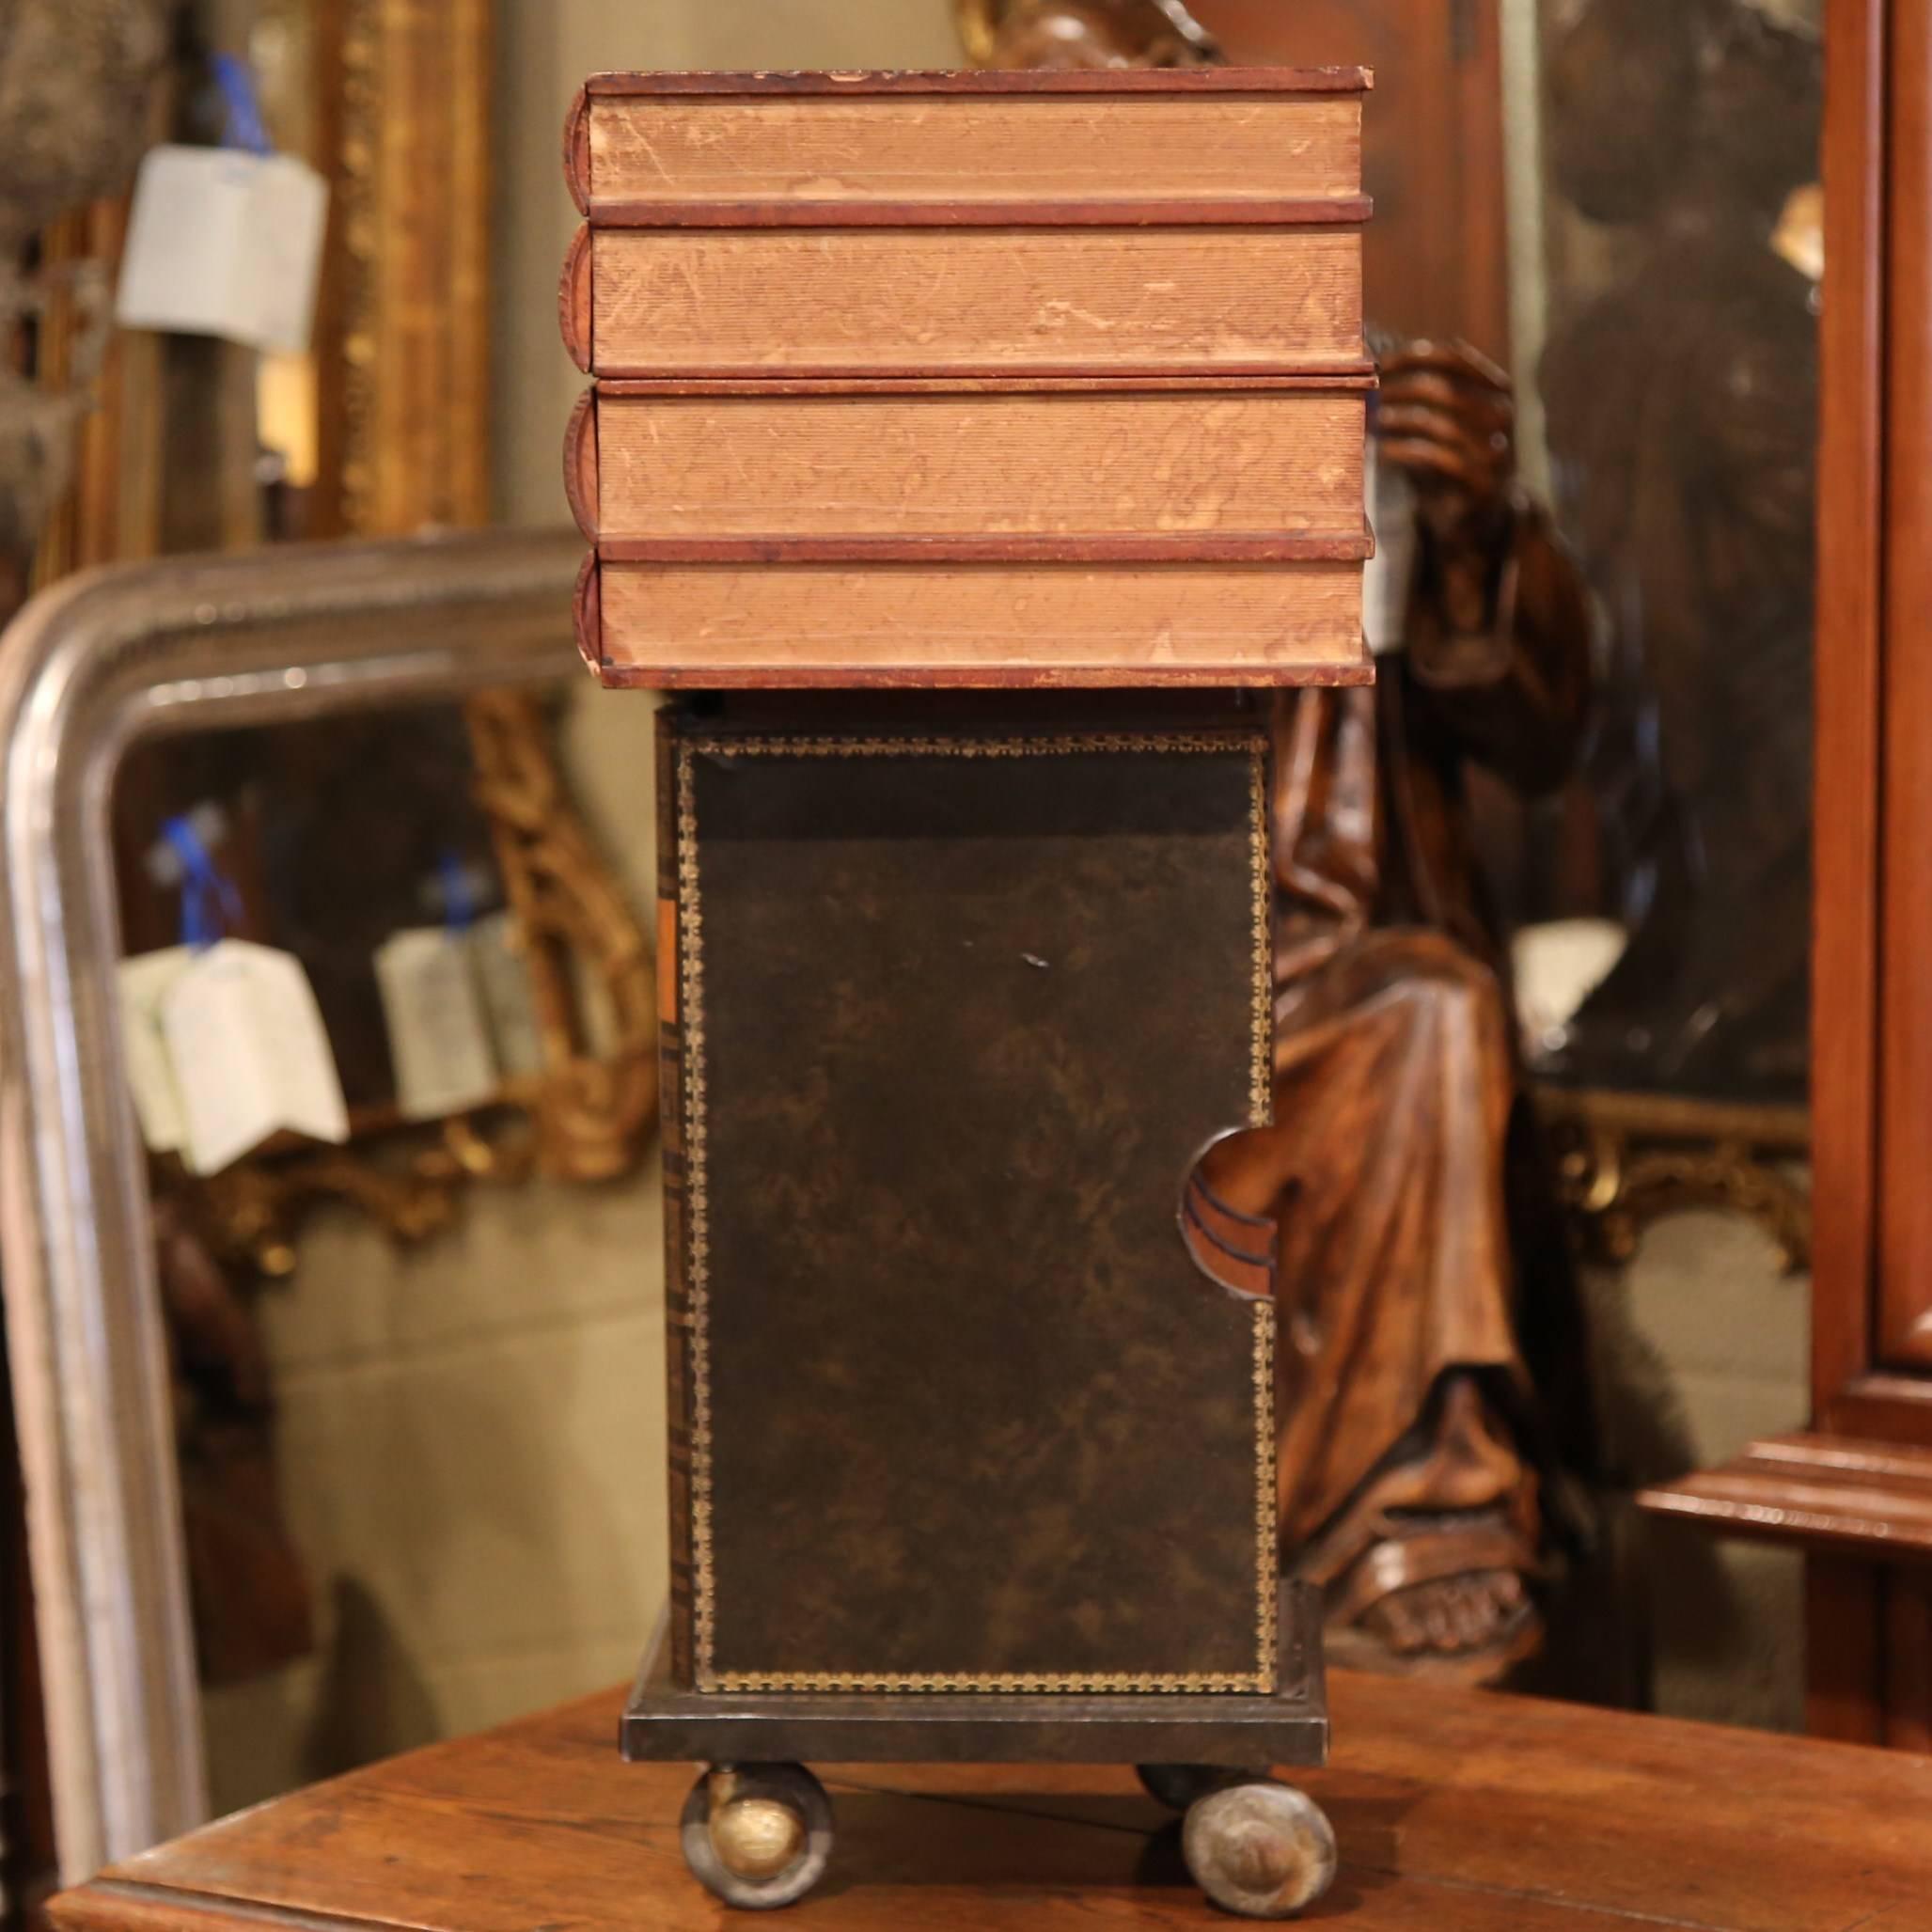 Wood Mid-20th Century French Decorative Stack-Book Side Table on Wheels